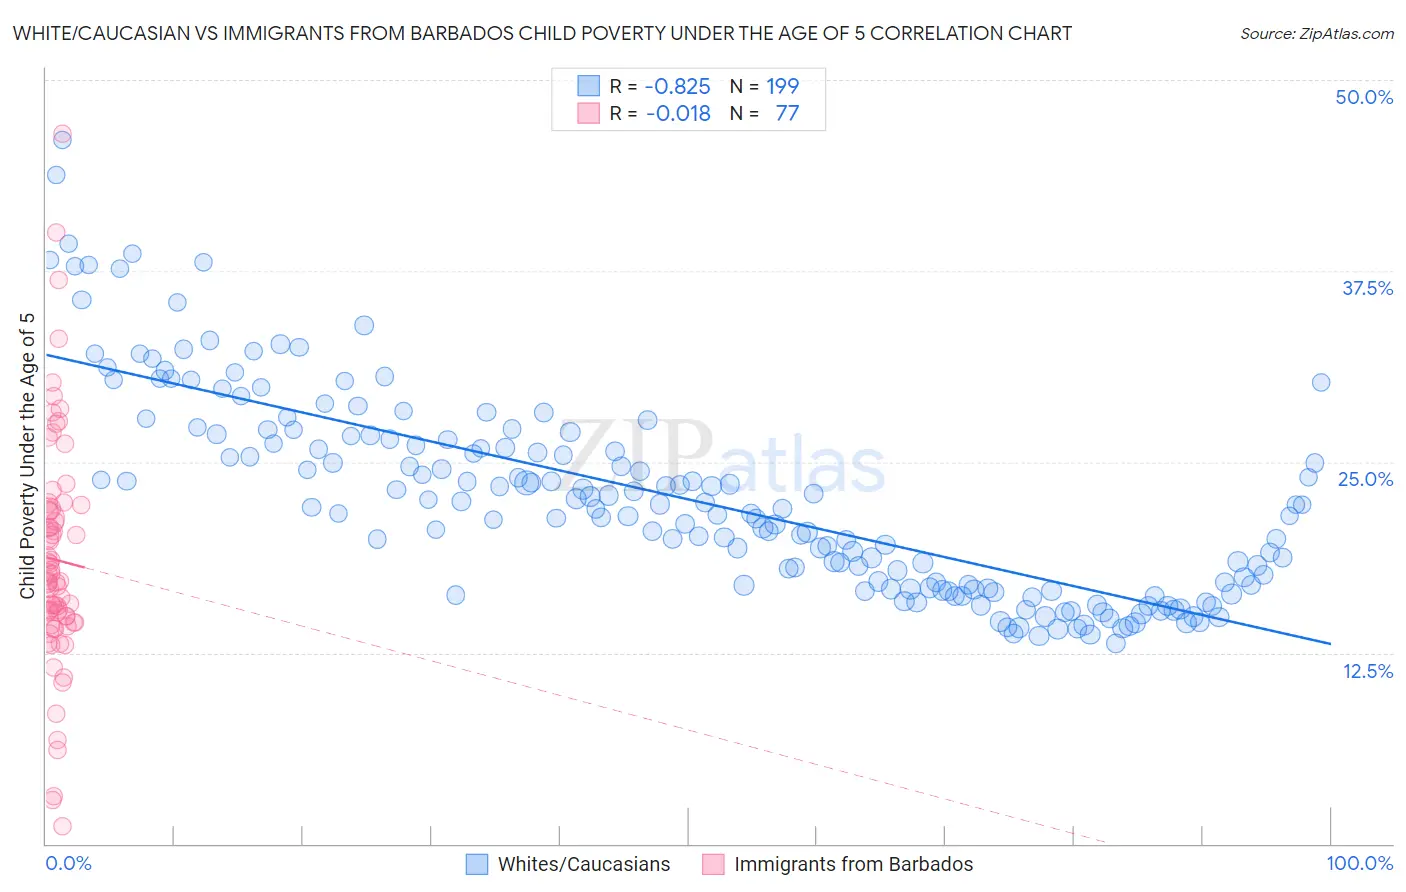 White/Caucasian vs Immigrants from Barbados Child Poverty Under the Age of 5